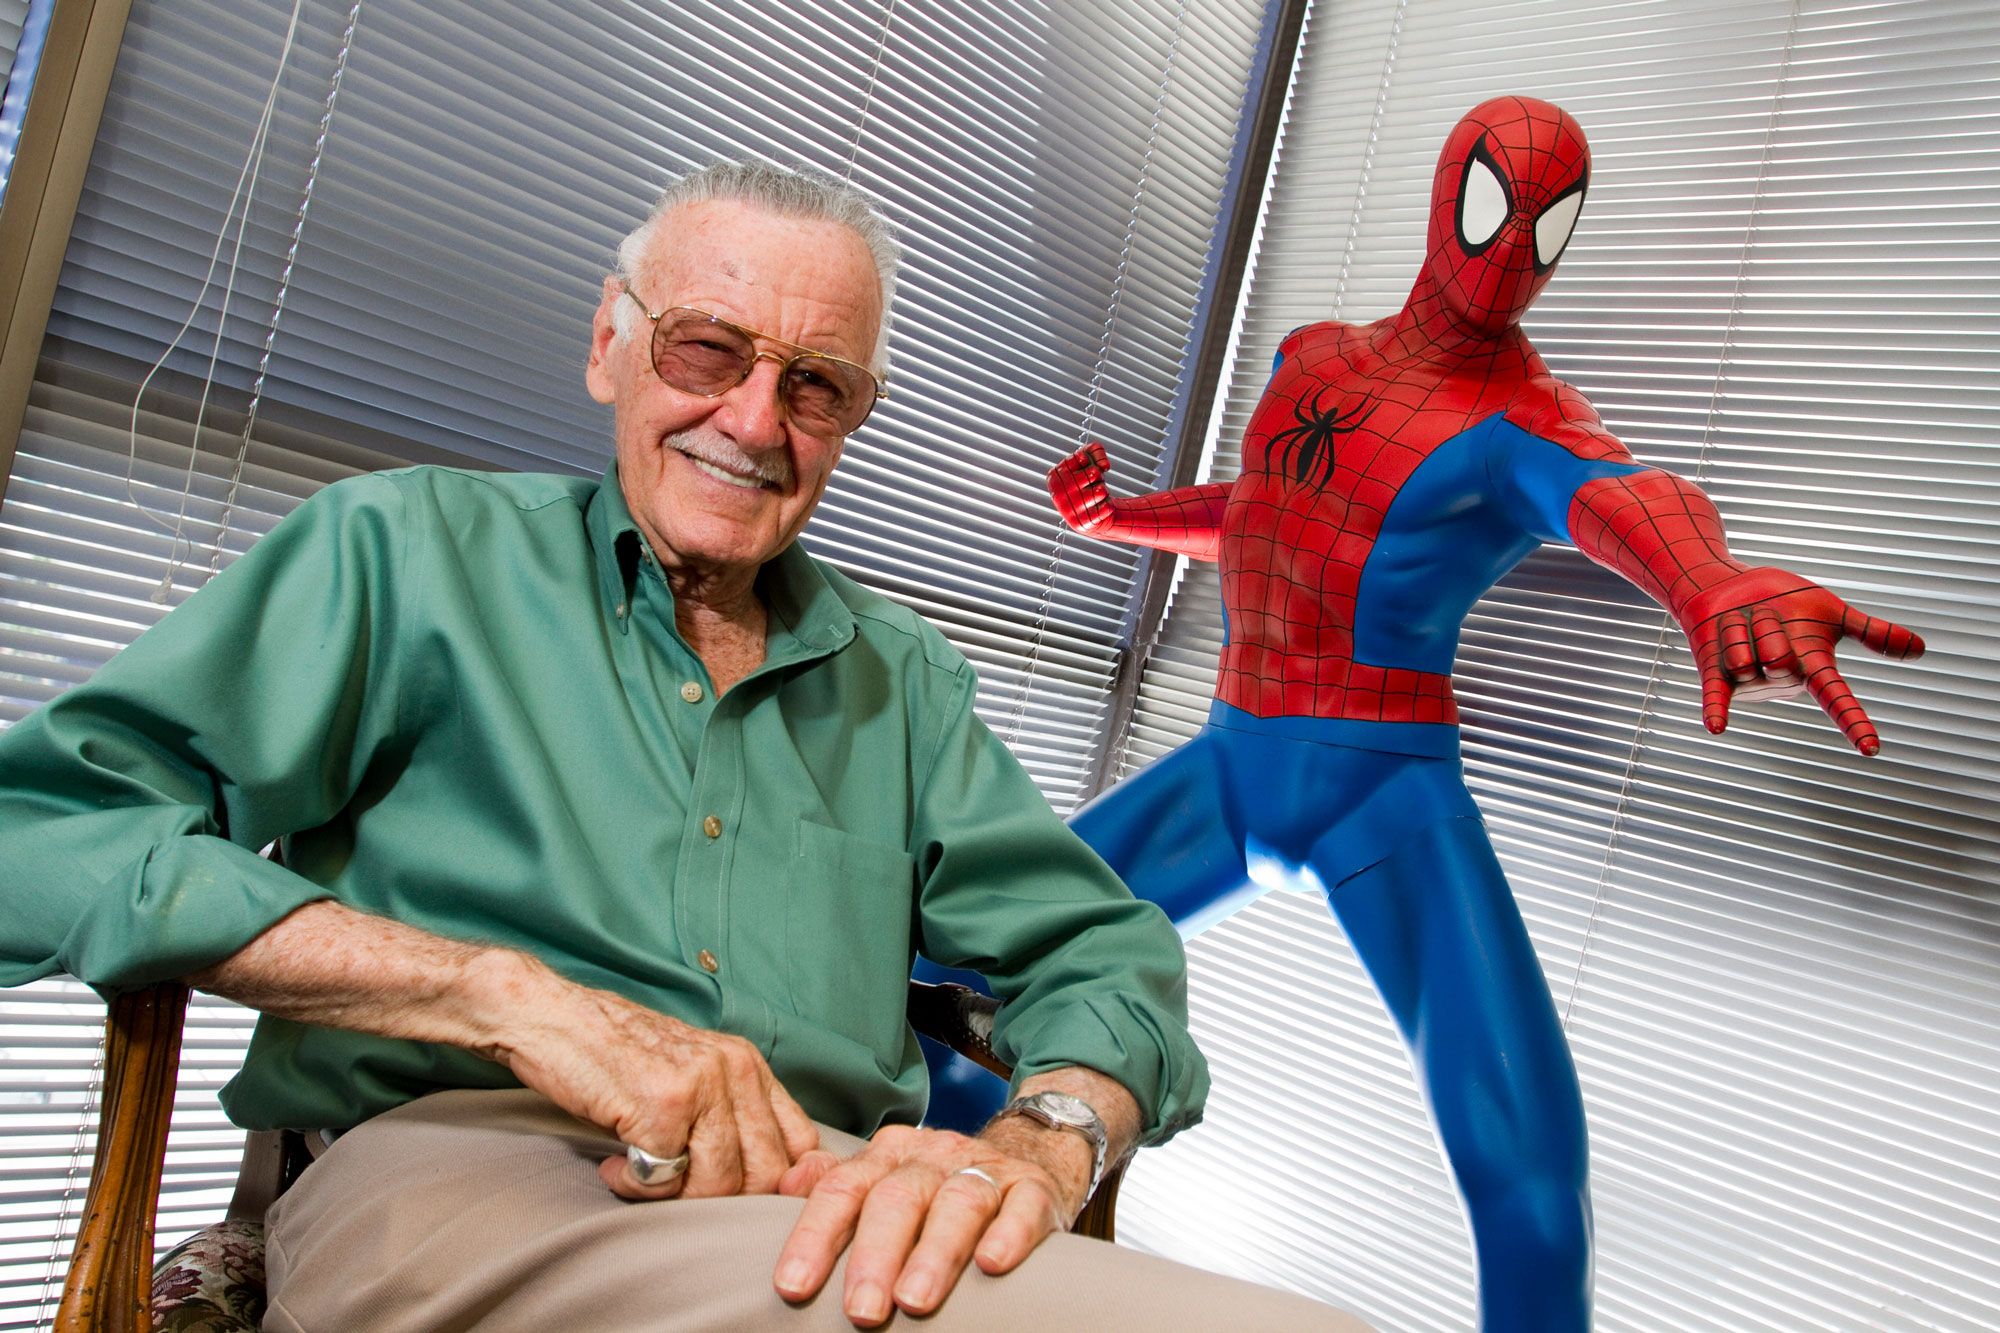 Here's the extra Spider-Man: Into the Spider-Verse Stan Lee cameo we all  missed